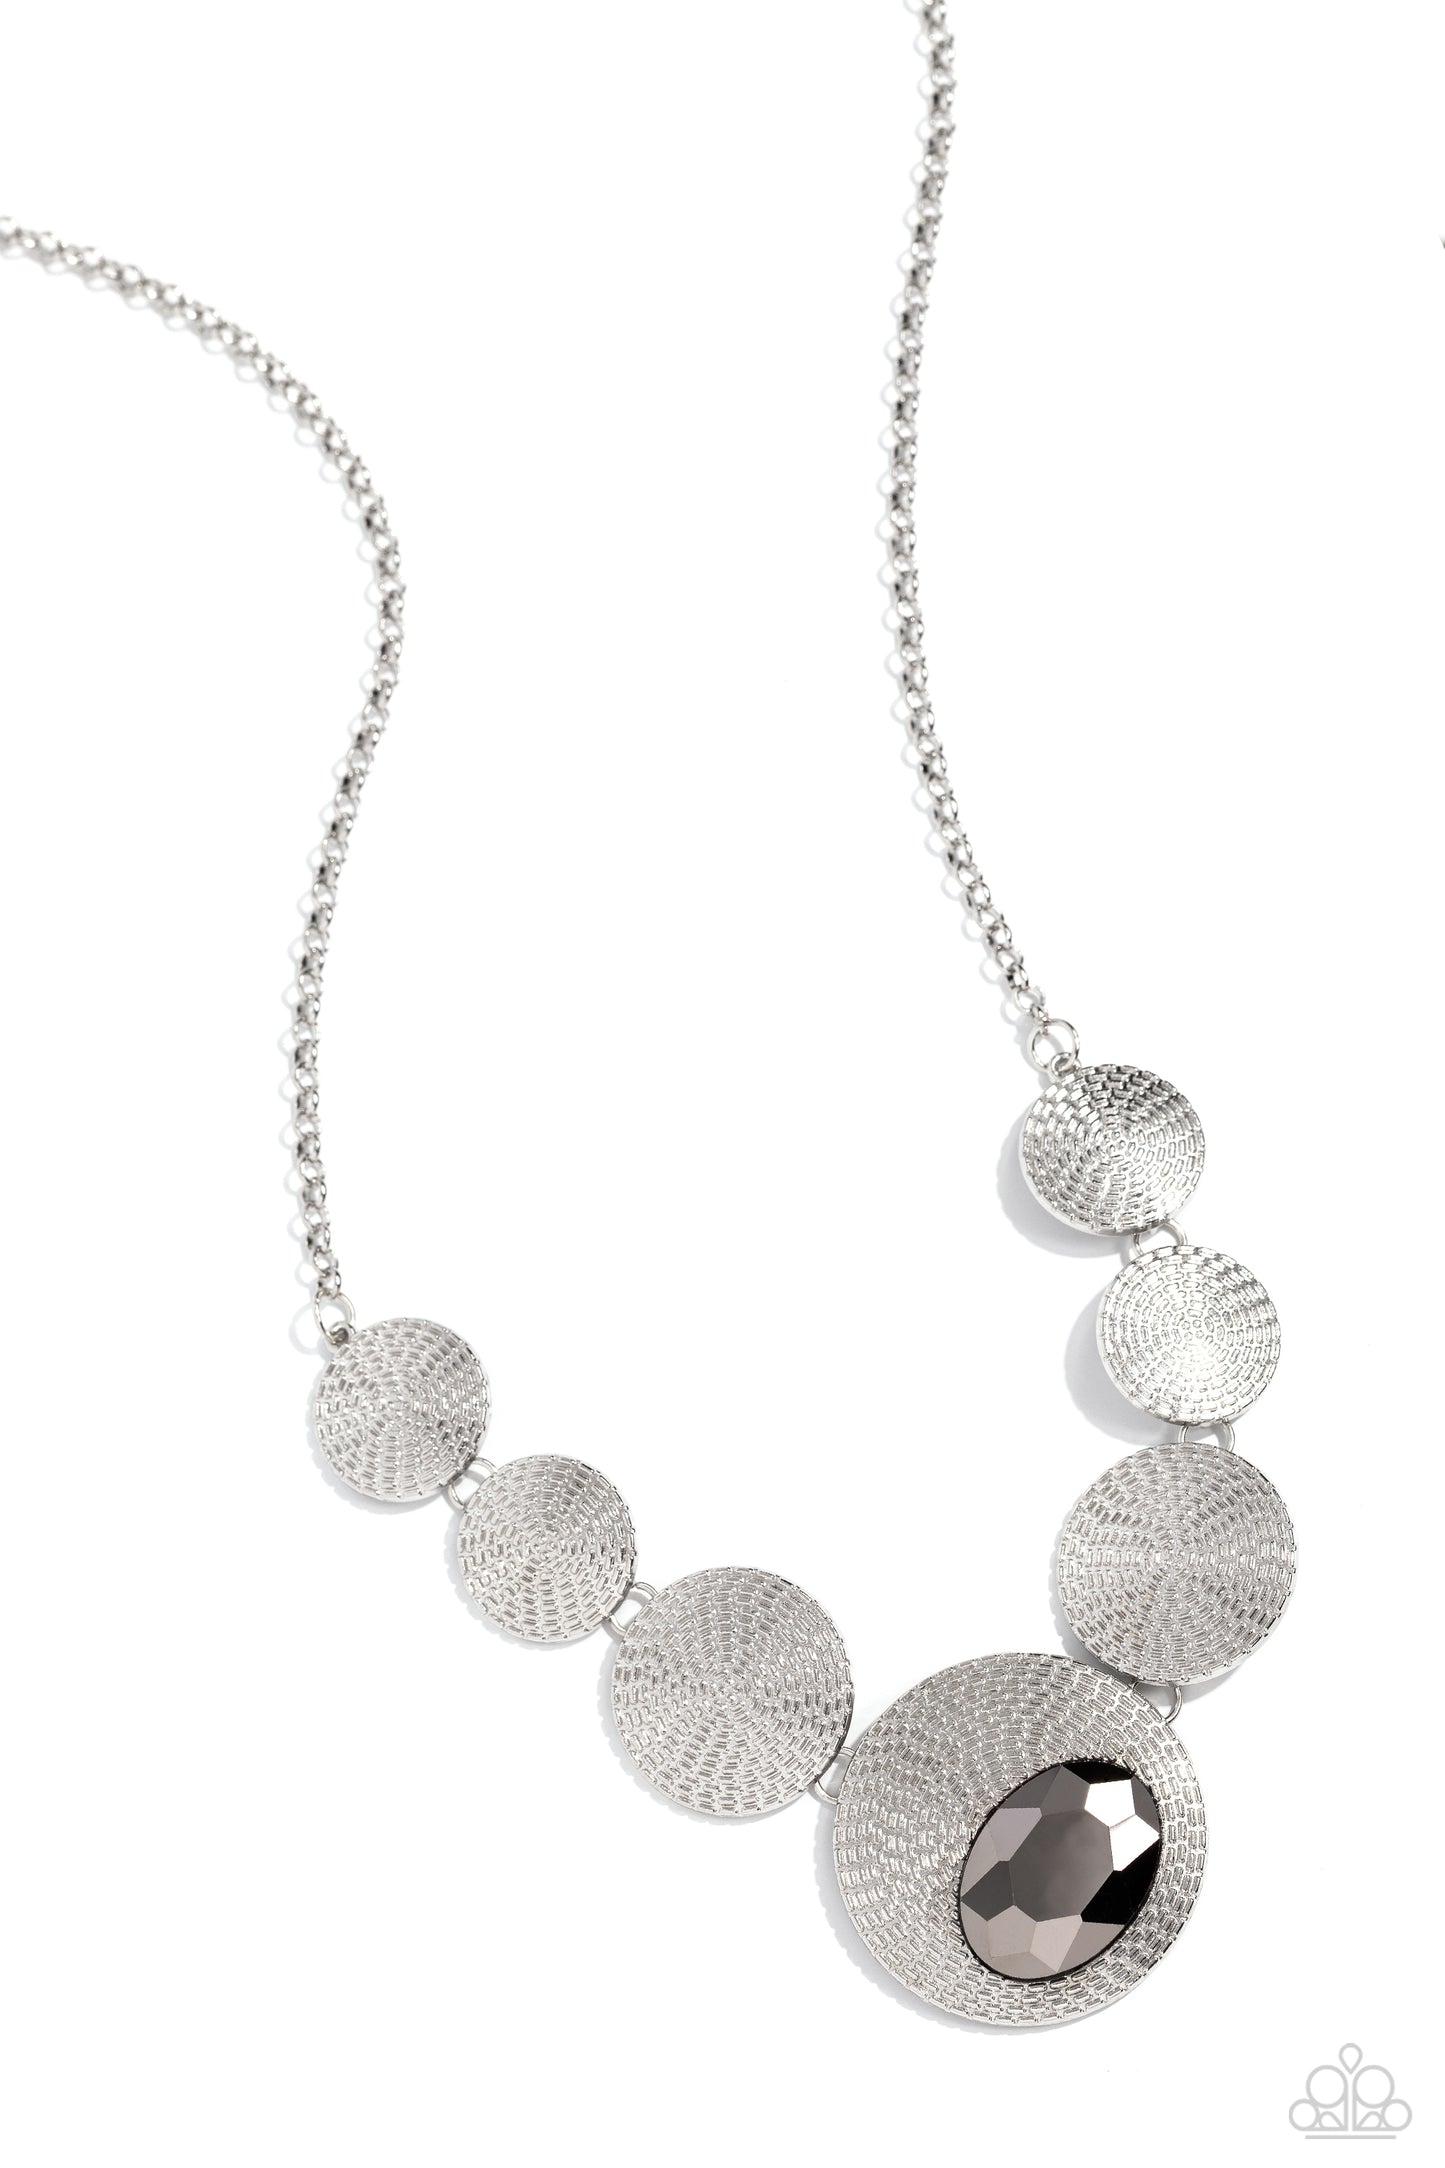 EDGY or Not - silver - Paparazzi necklace